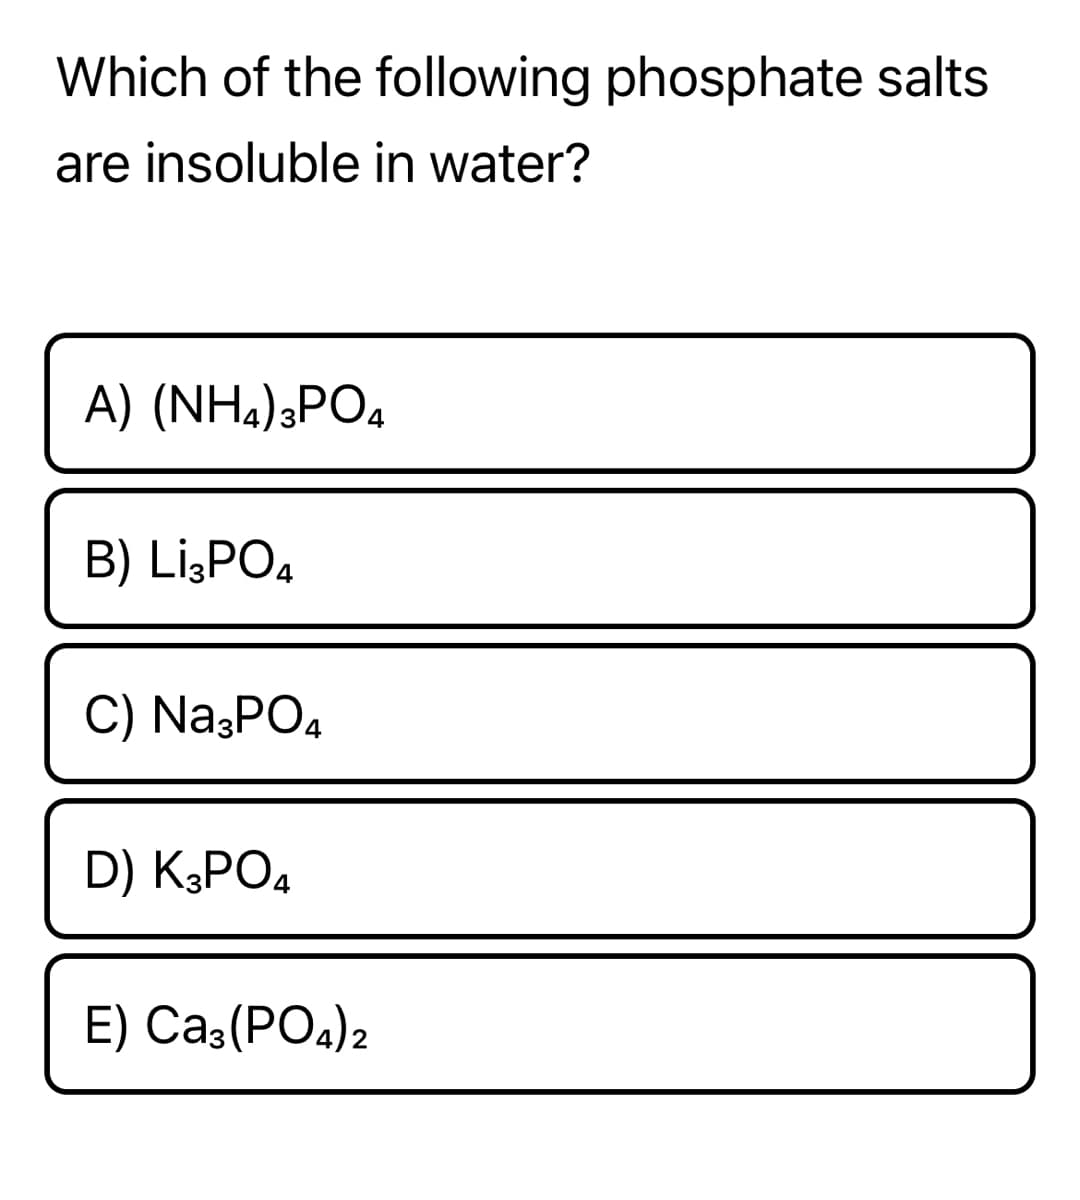 Which of the following phosphate salts
are insoluble in water?
A) (NH.),PO4
B) Li¿PO4
C) Na;PO4
D) K3PO4
E) Ca3(PO4)2
